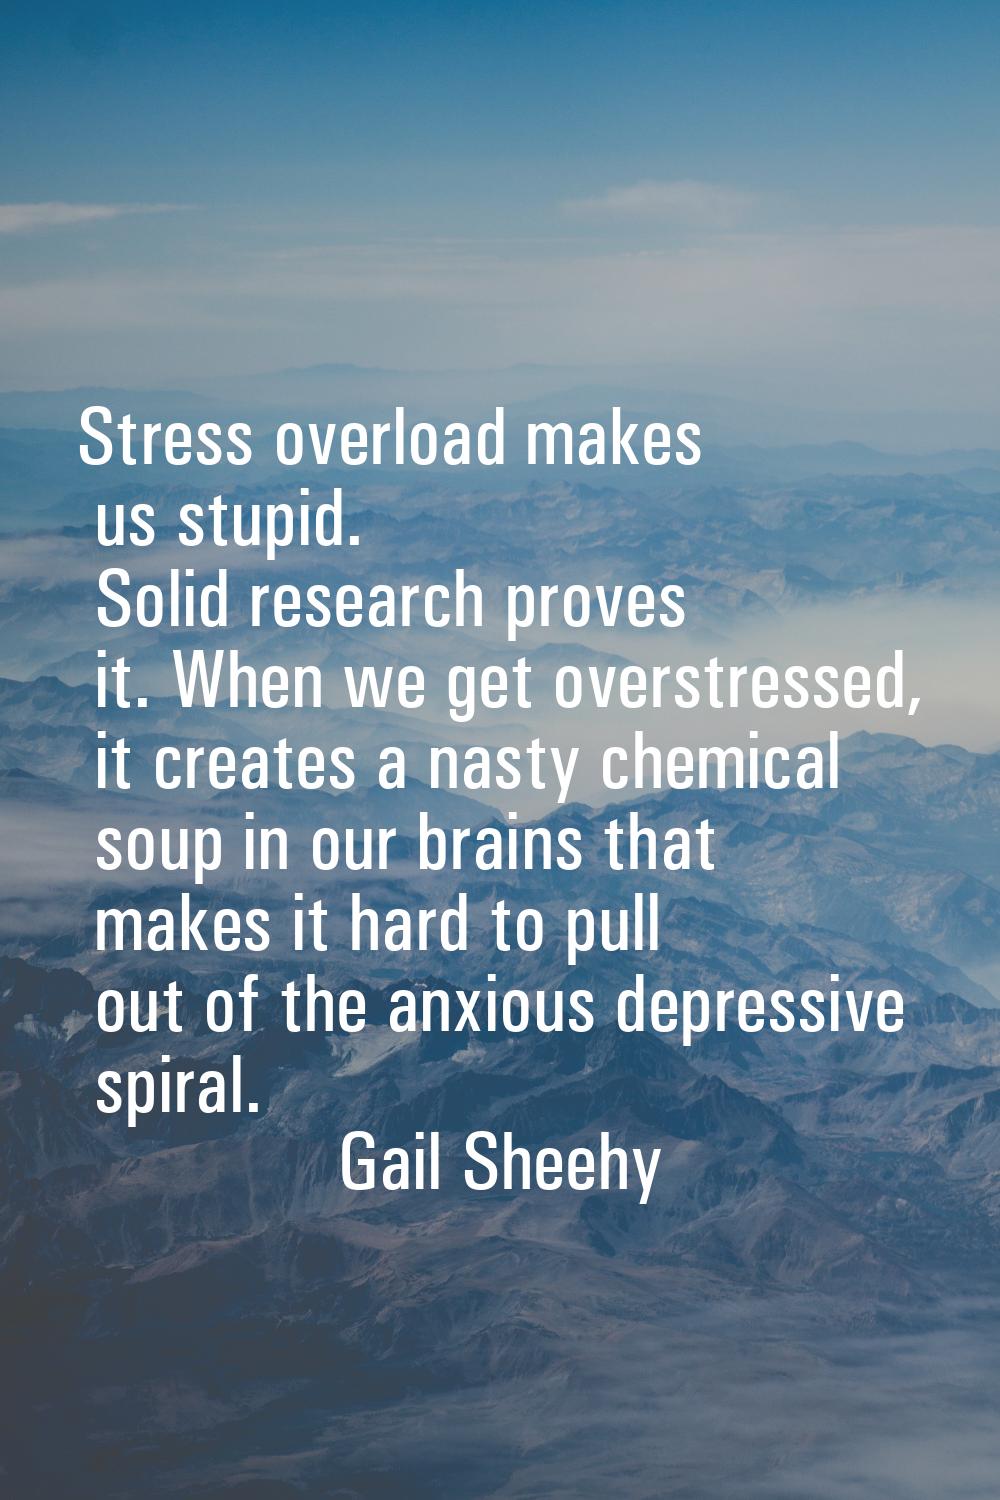 Stress overload makes us stupid. Solid research proves it. When we get overstressed, it creates a n